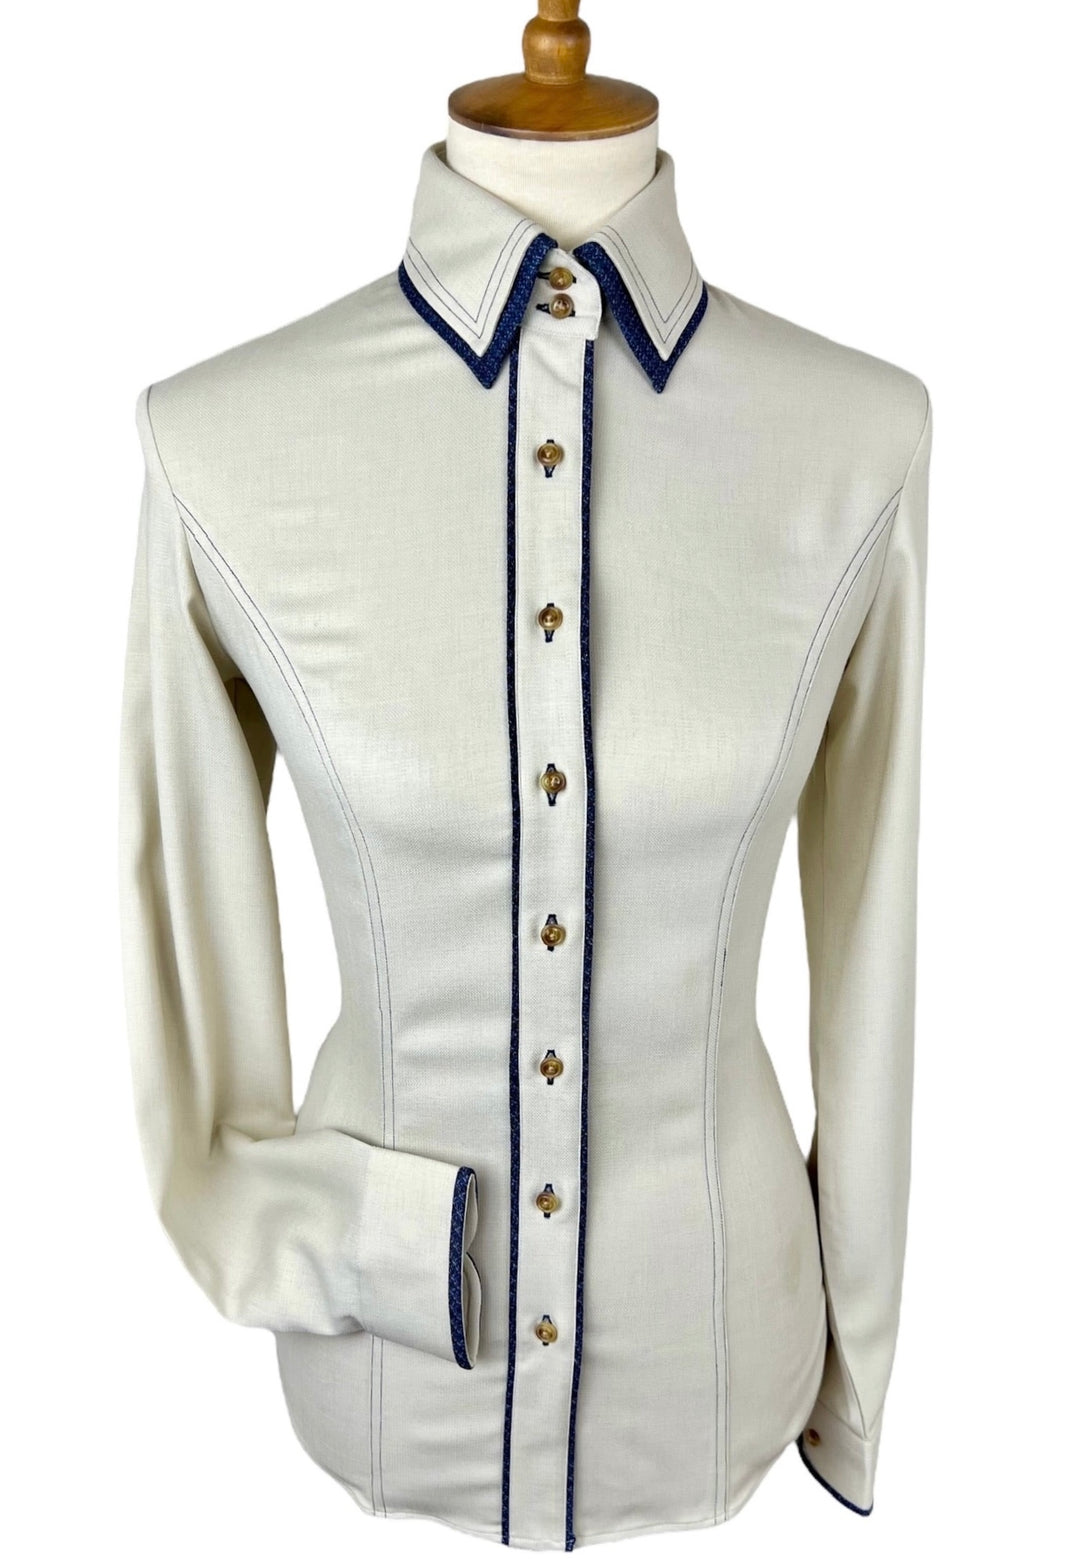 The Lettie Western Shirt